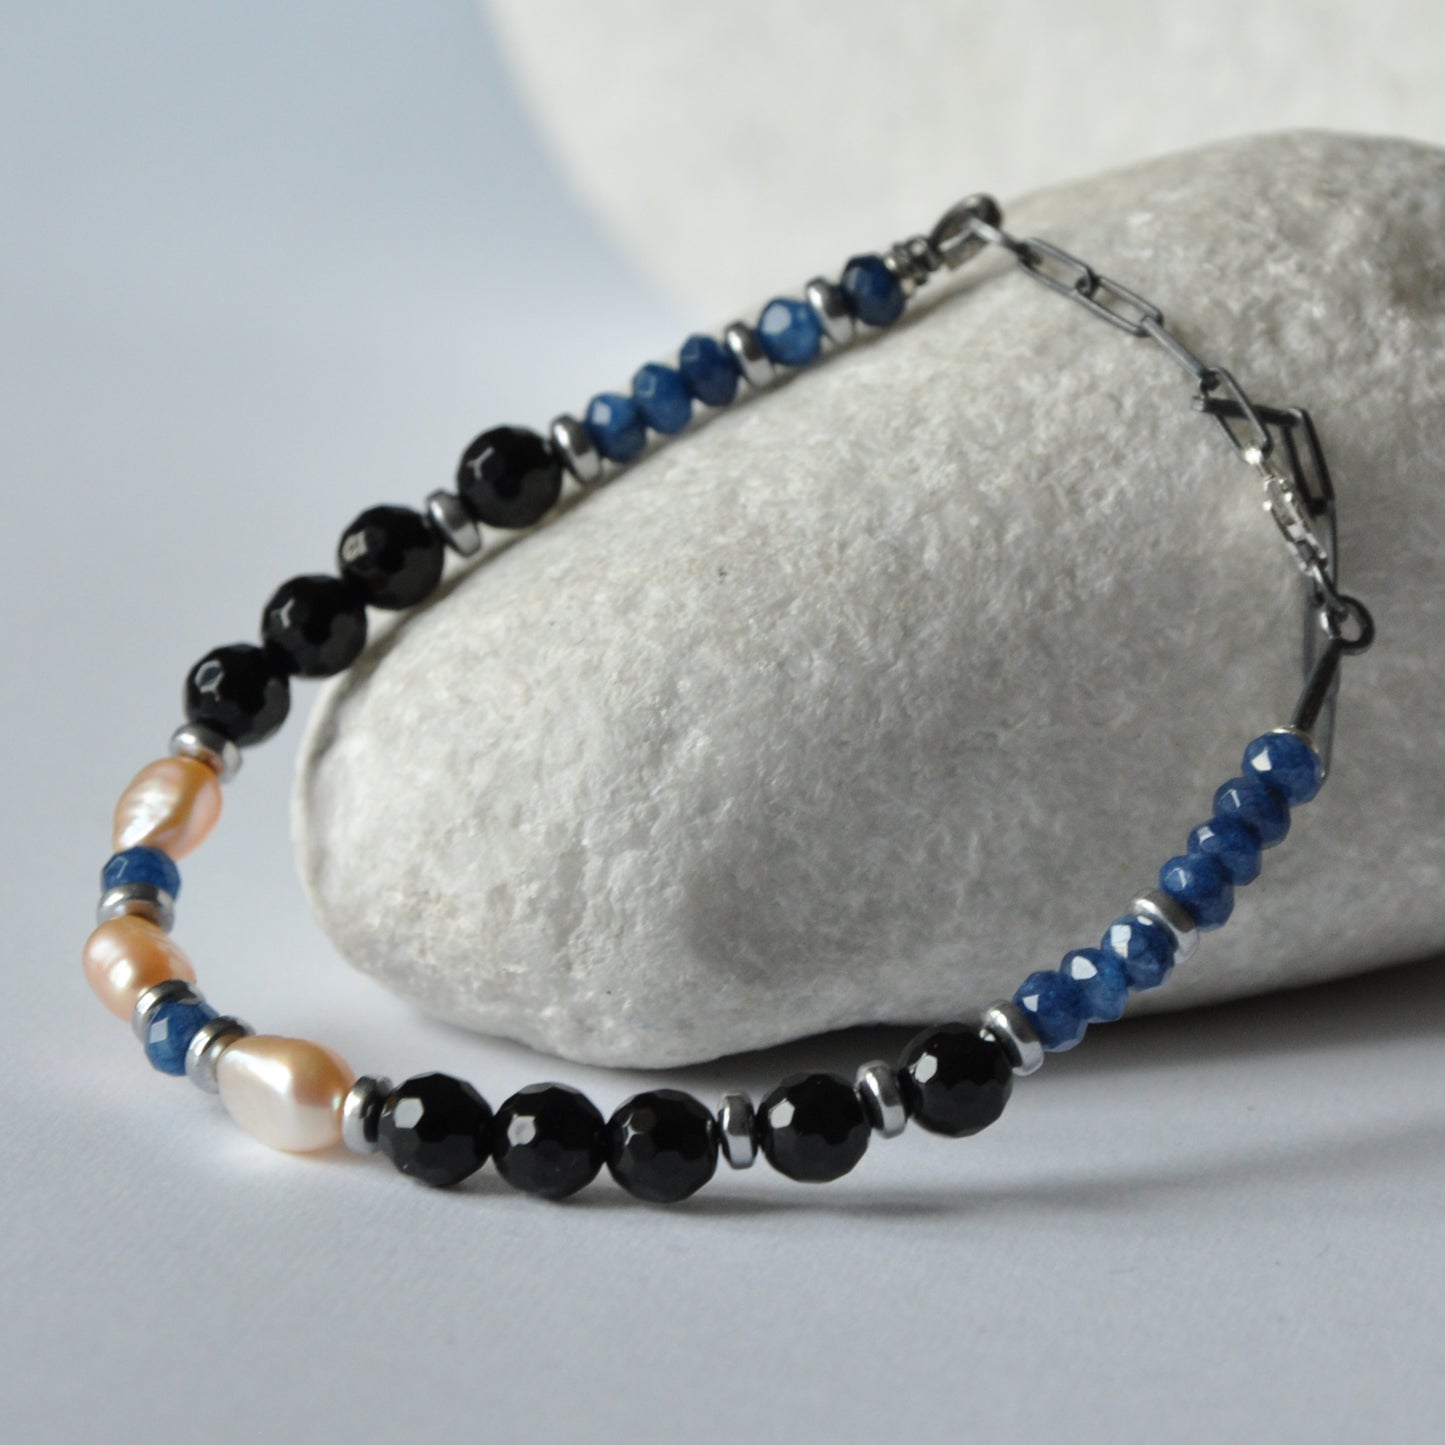 Bracelet with natural pearls in salmon color, onyx and dark blue agate rondelles 'Pearls with Onyx'